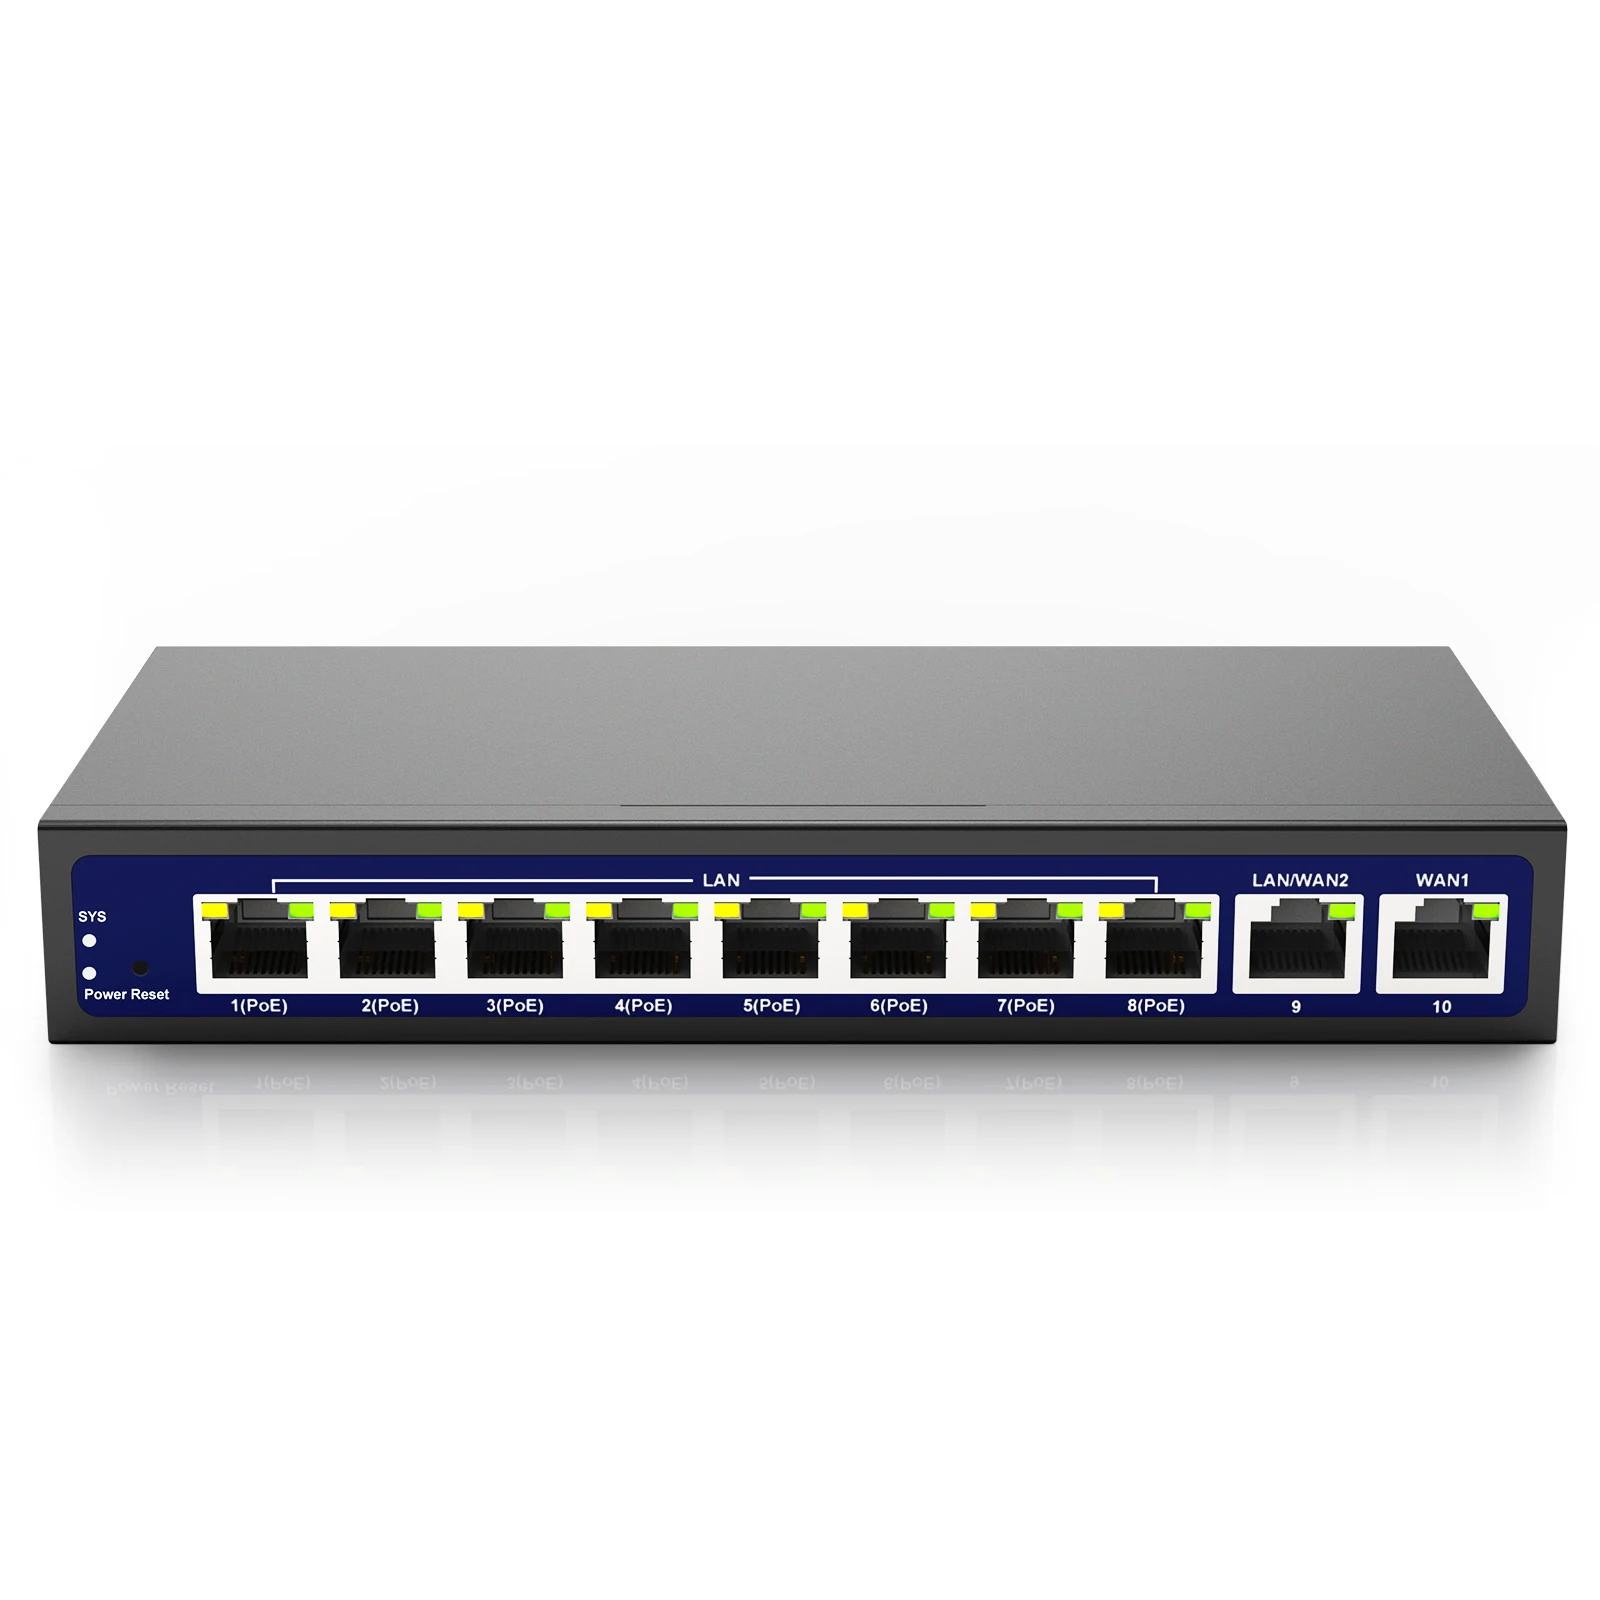 UeeVii Gigabit Hardware Controller High Performance Managed Controller 10 Ports with AC Management Only Support UeeVii UAP03